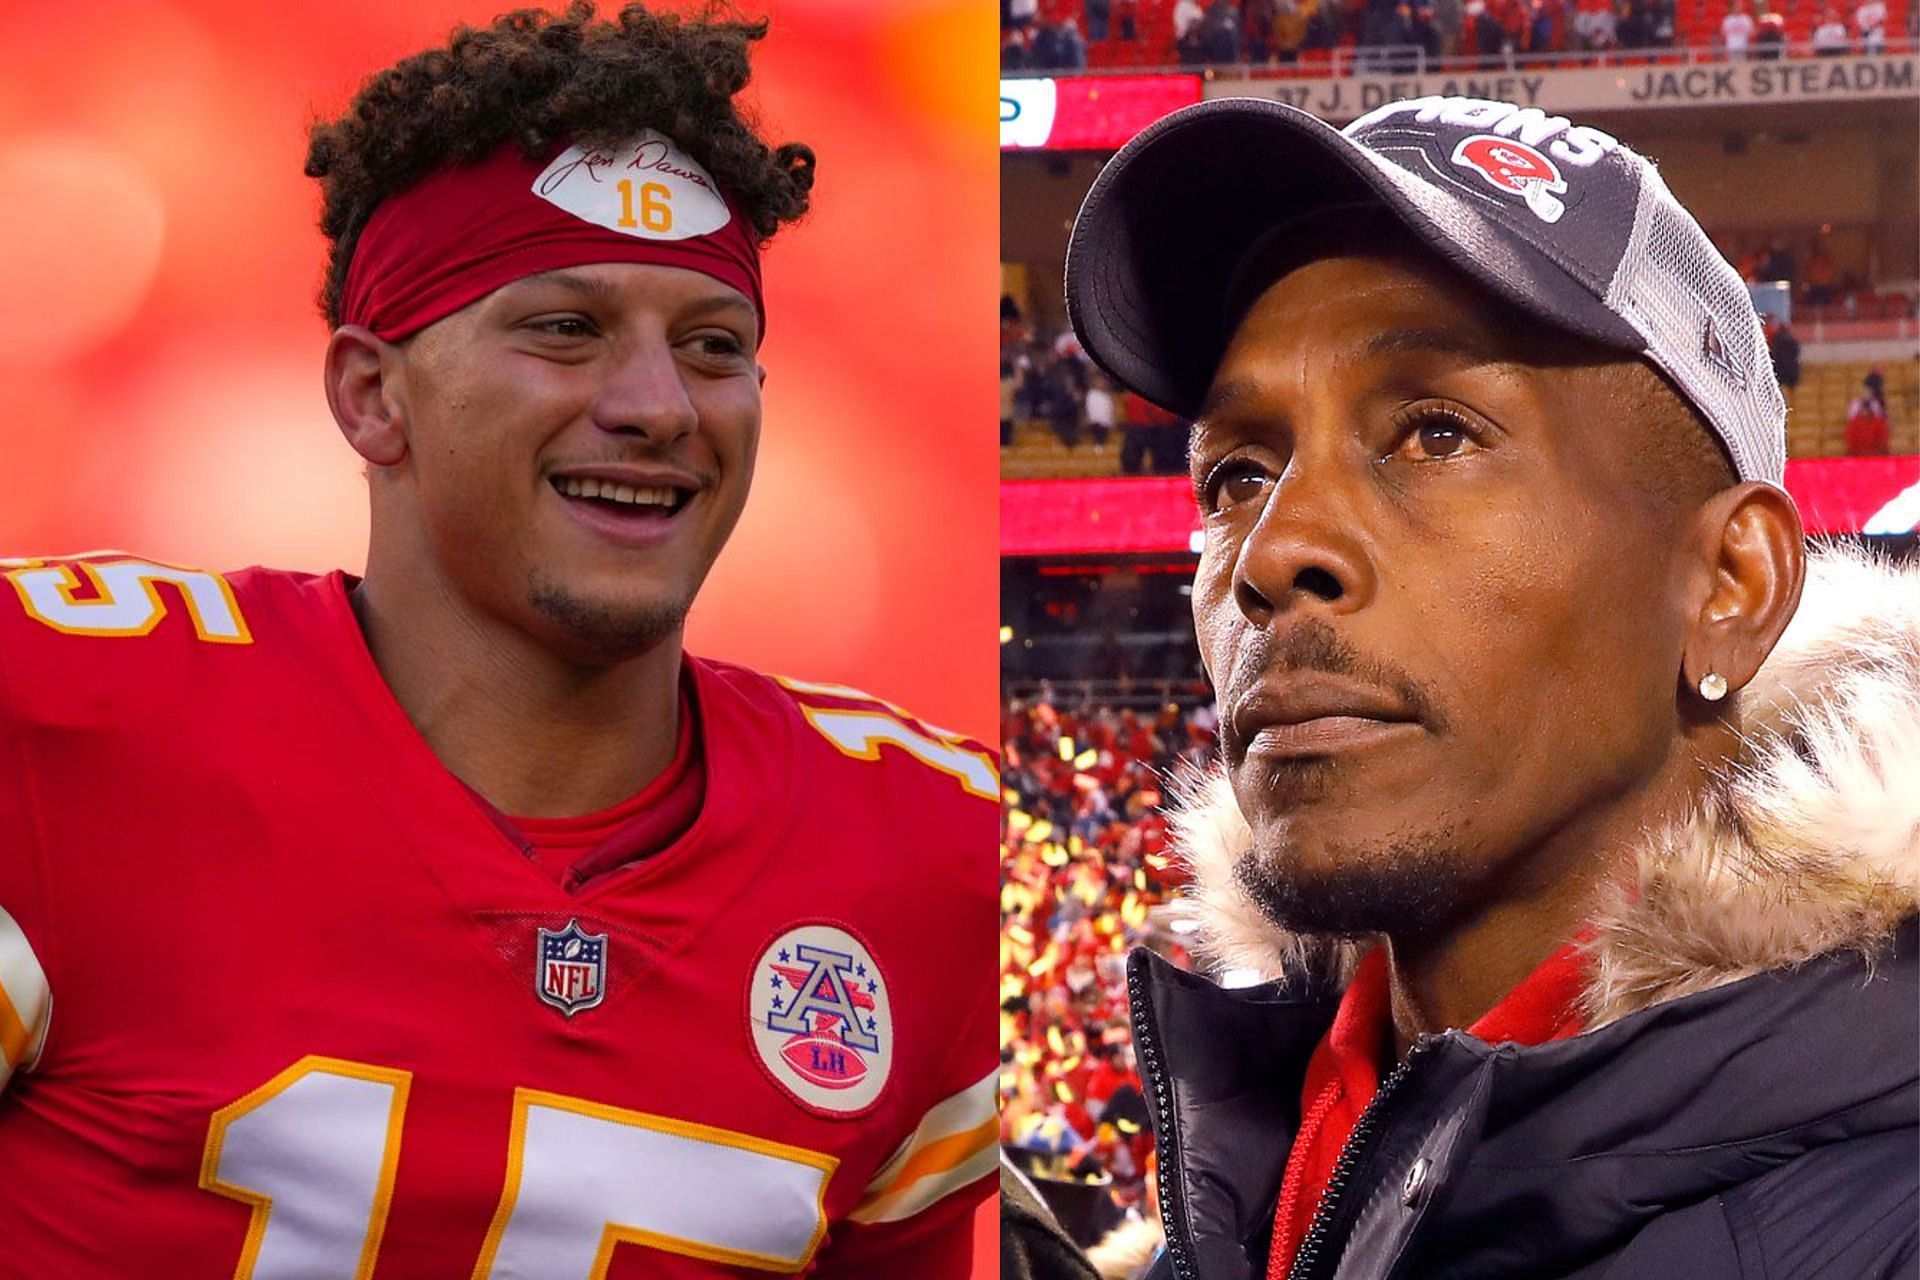 Patrick Mahomes of the Chiefs and his father